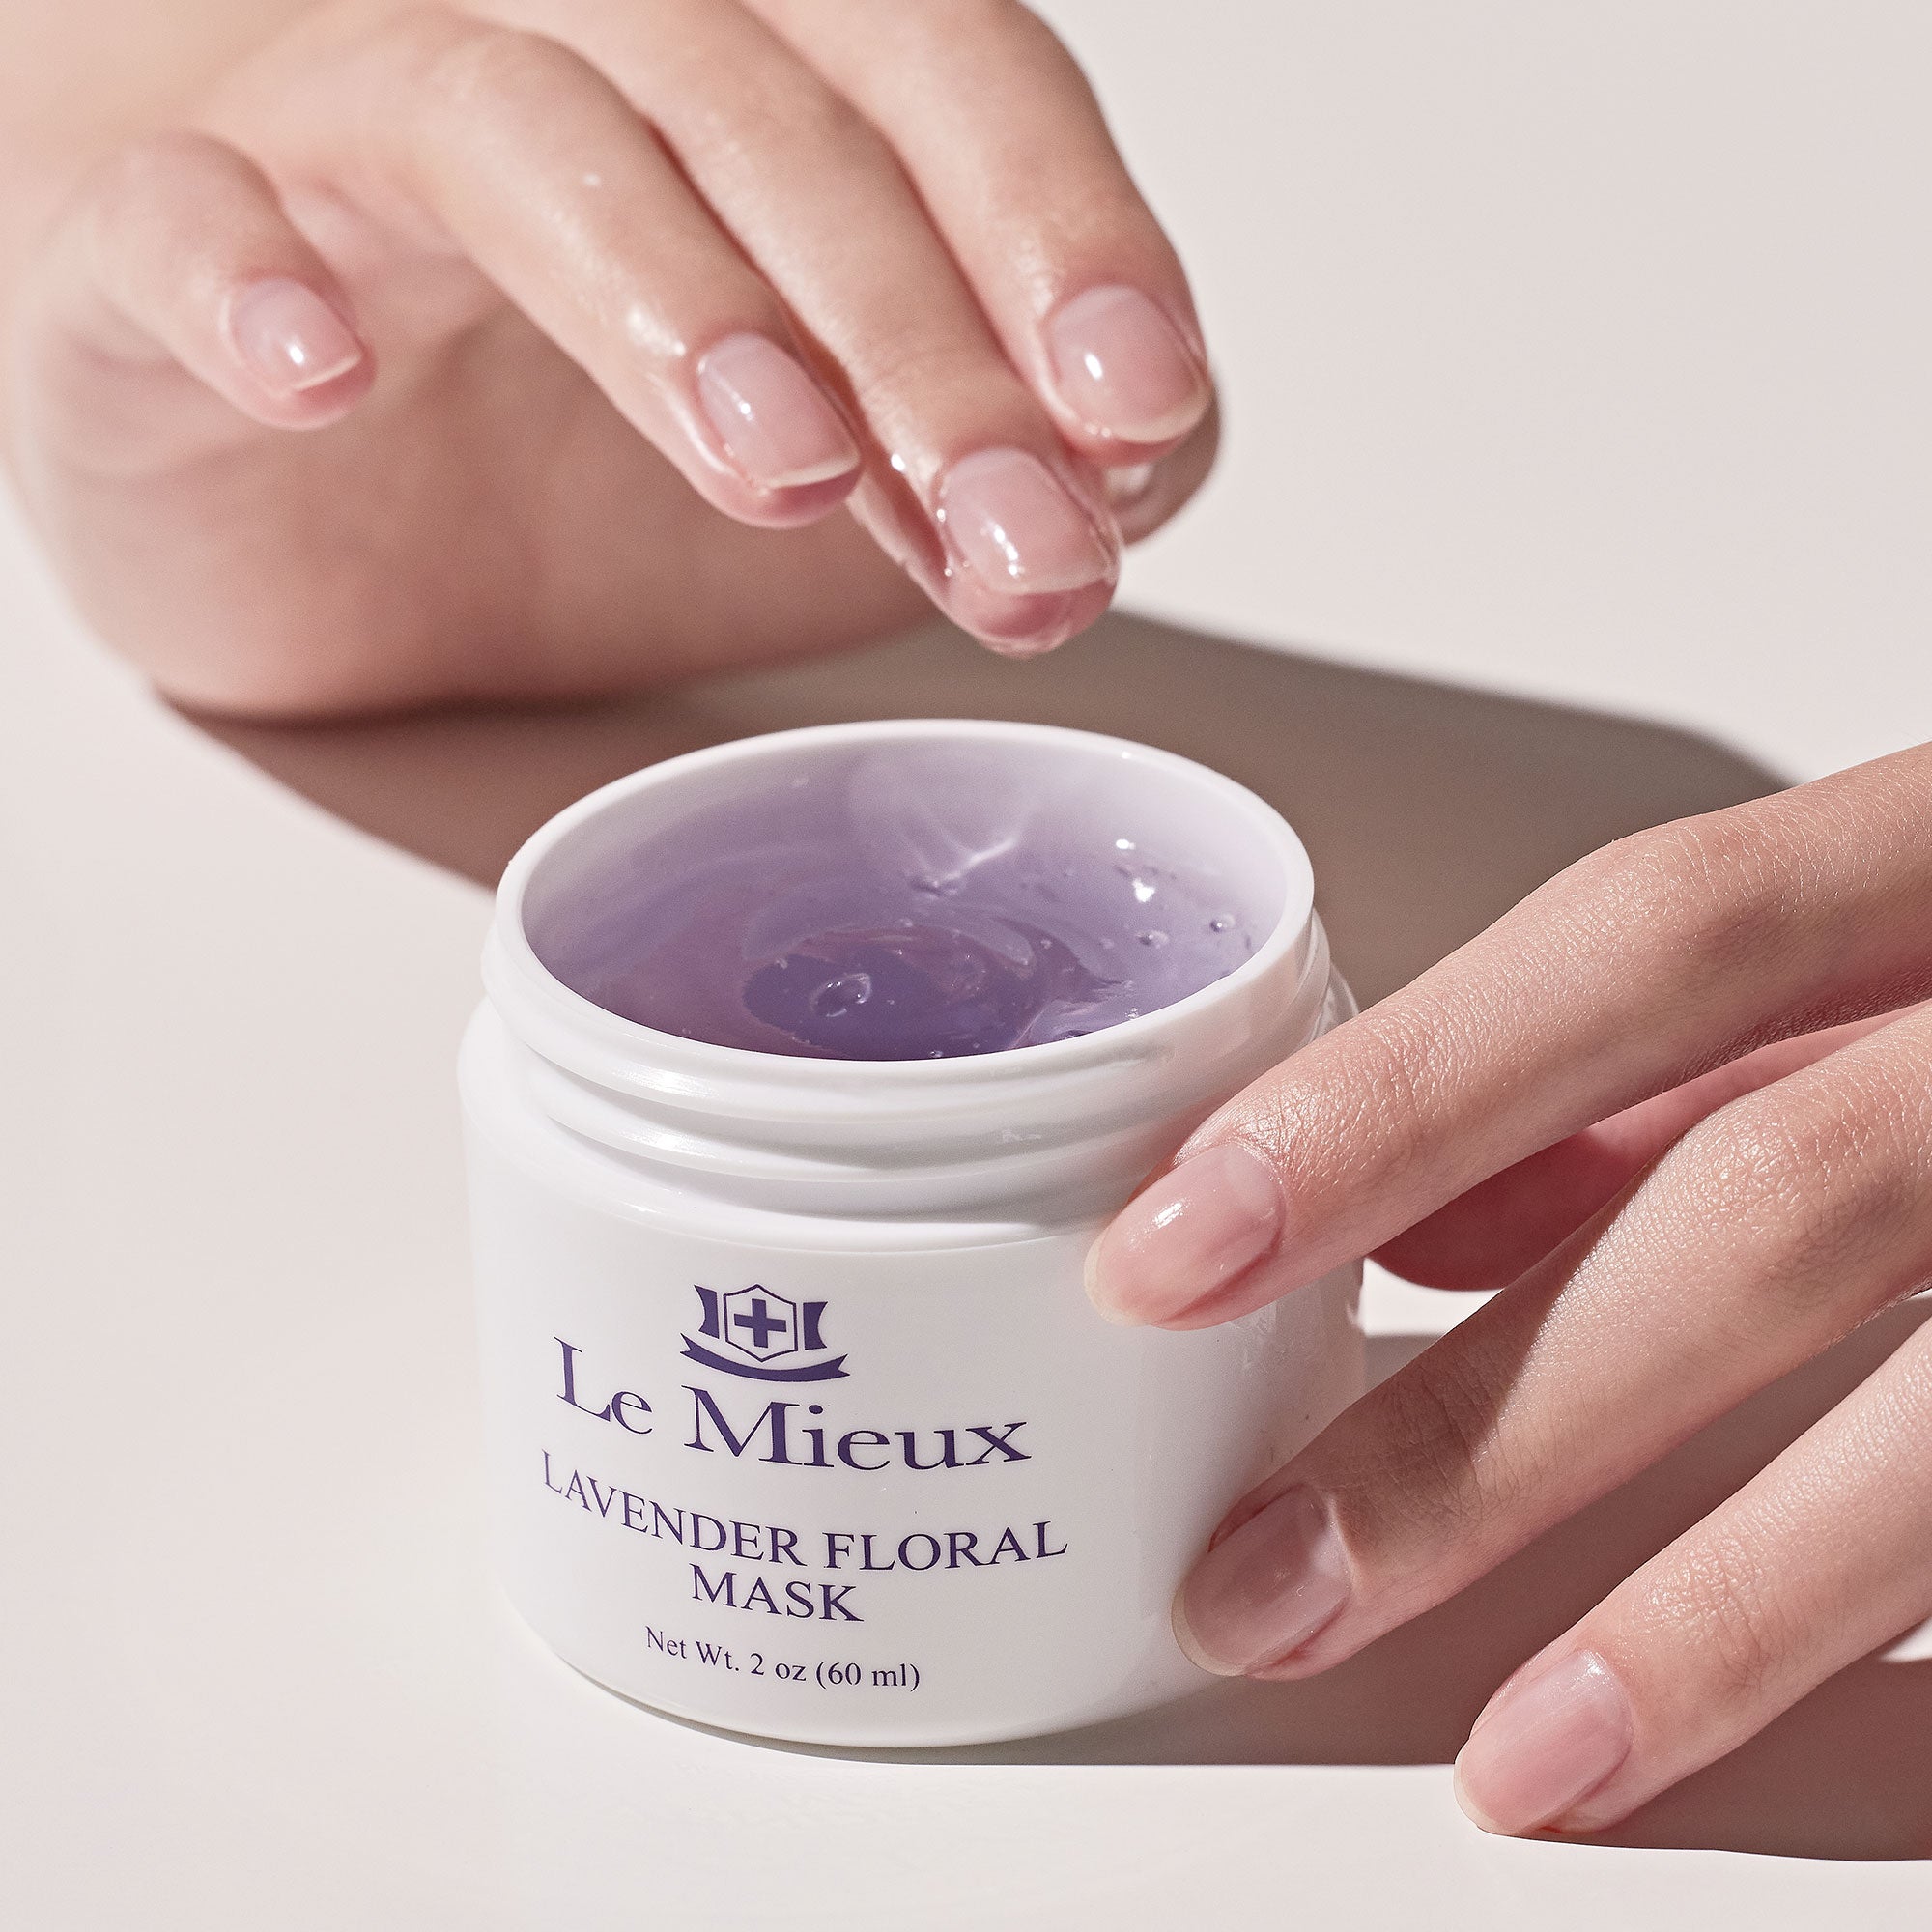  LAVENDER FLORAL MASK from Le Mieux Skincare - 3